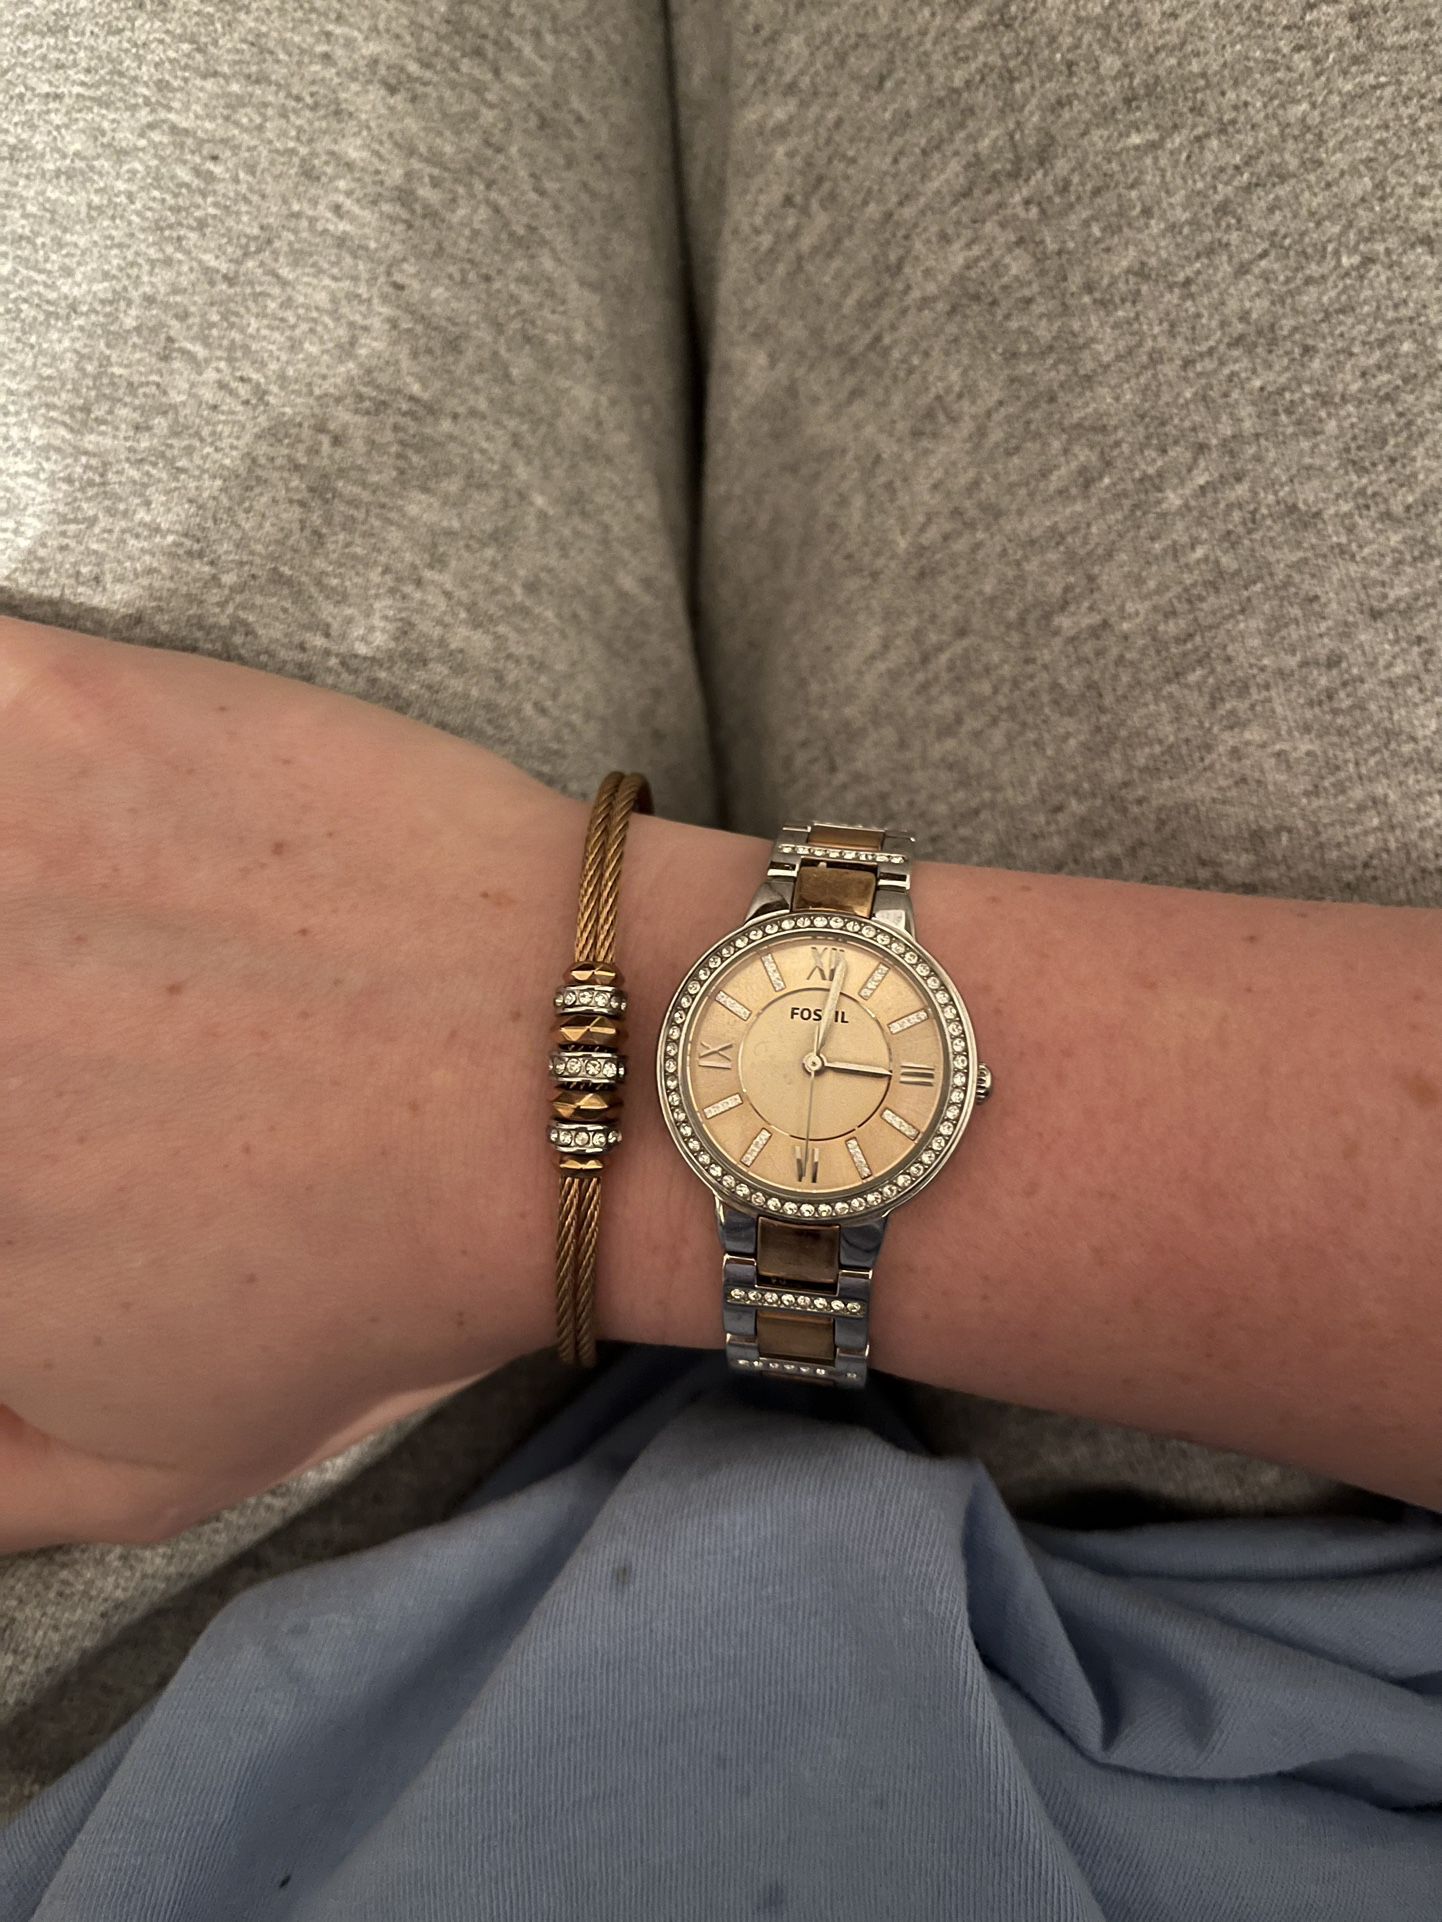 Fossil Watch With Matching Bracelet